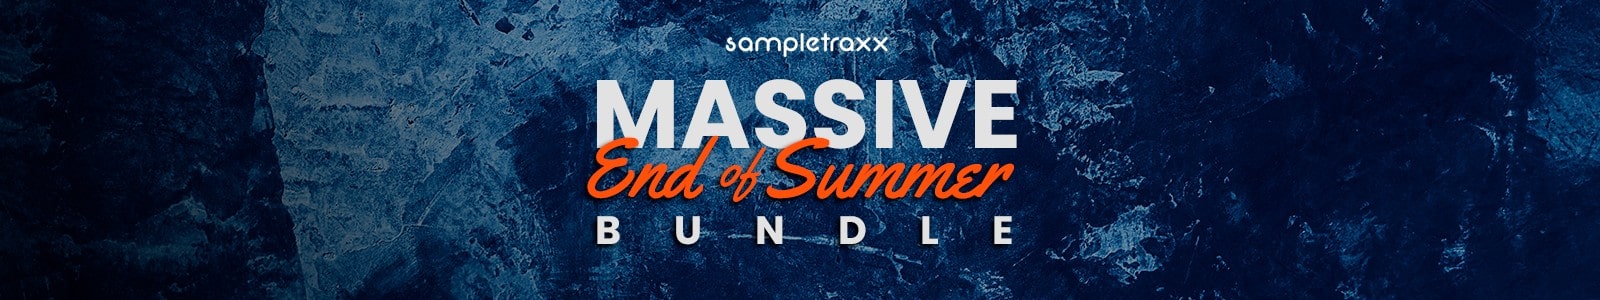 Massive 3-in-1 End of Summer Bundle by Sampletraxx